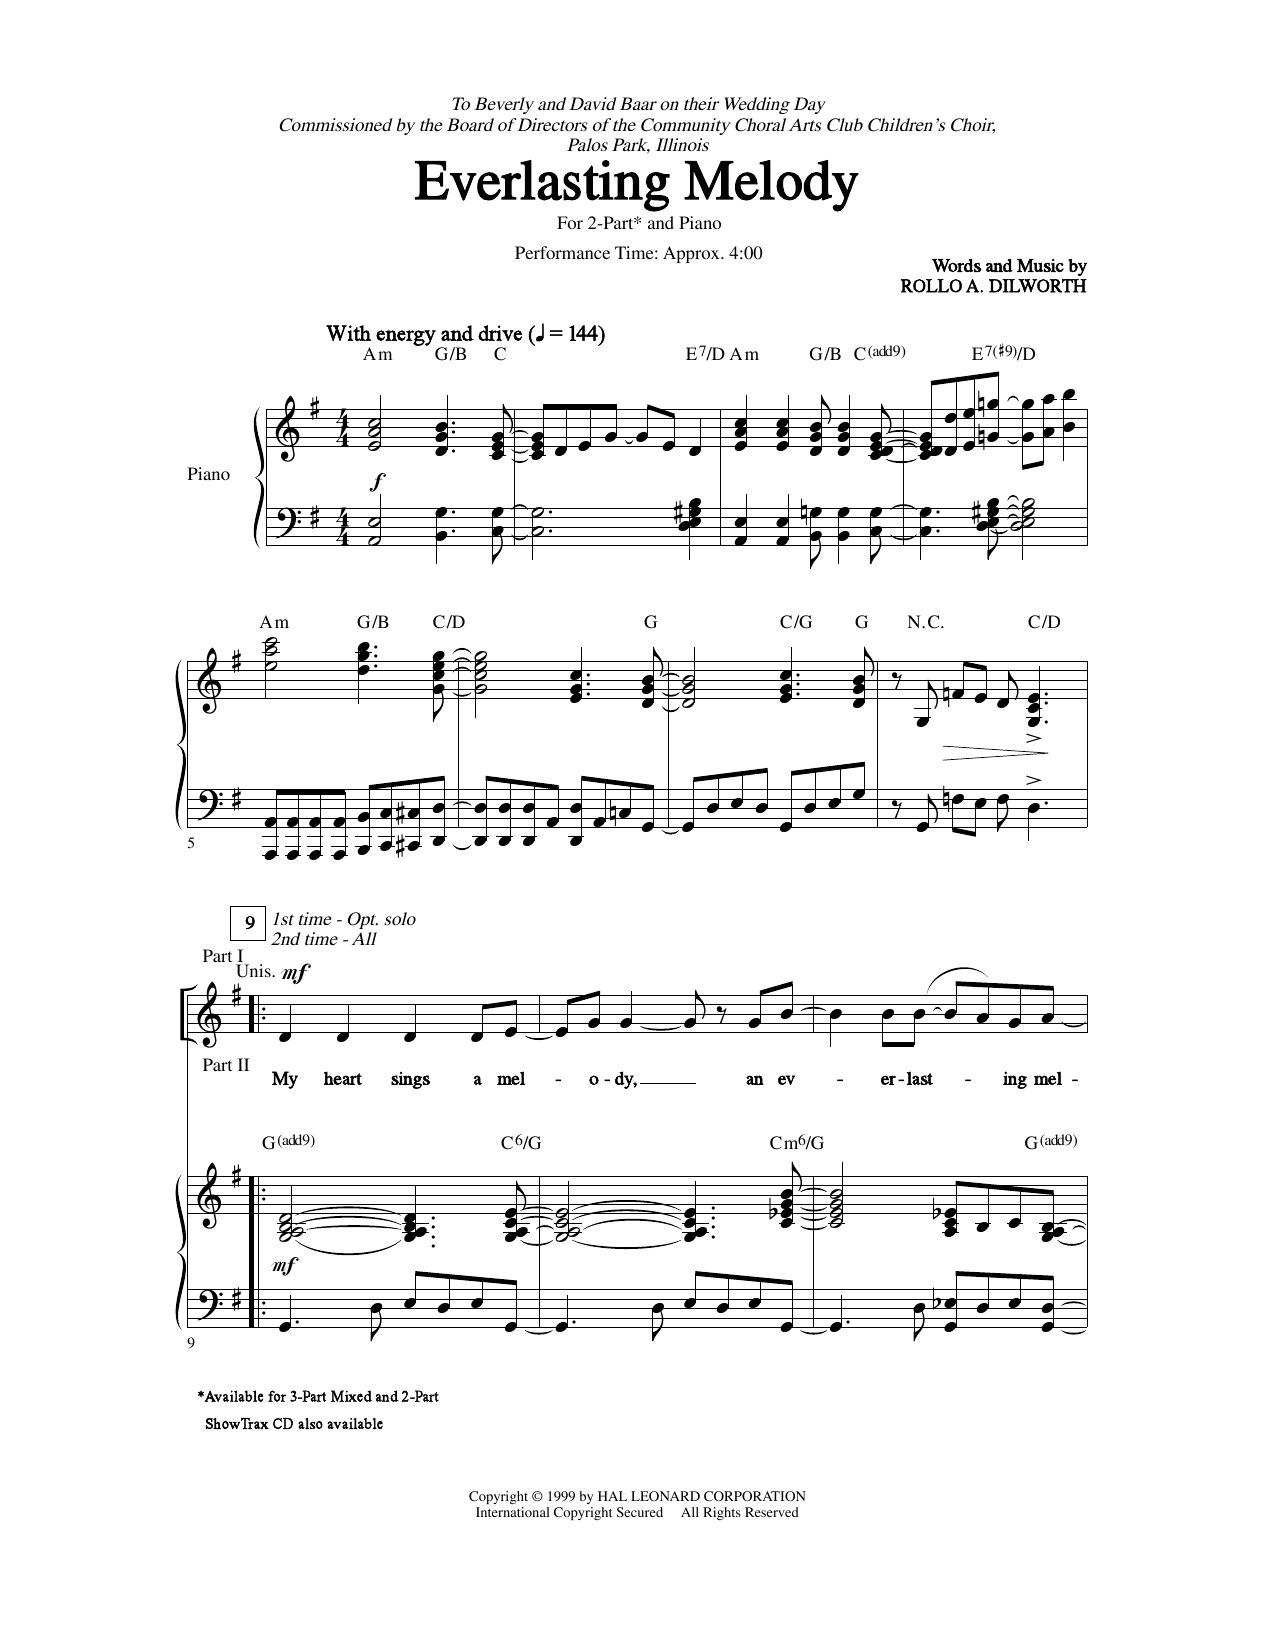 Download Rollo Dilworth Everlasting Melody Sheet Music